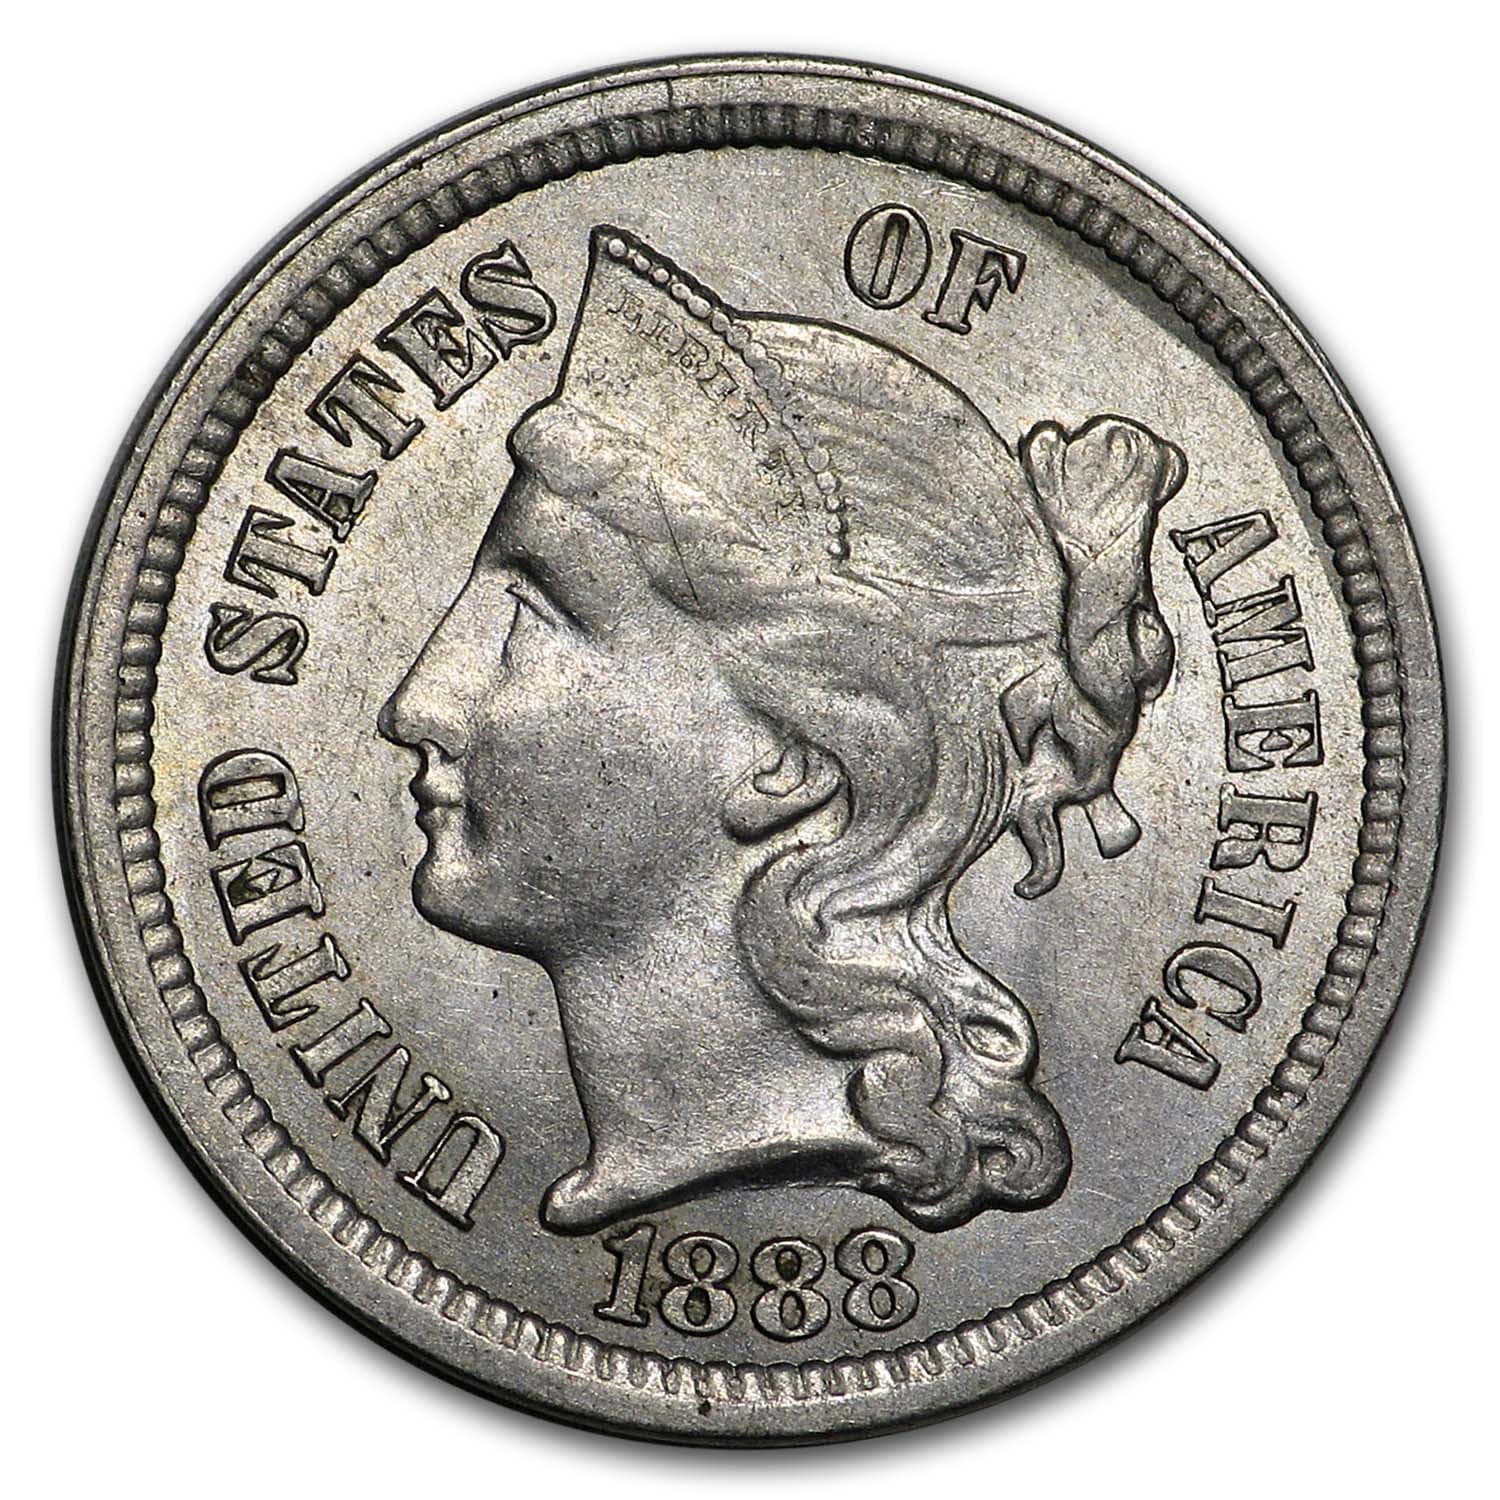 Buy 1888 3 Cent Nickel AU - Click Image to Close